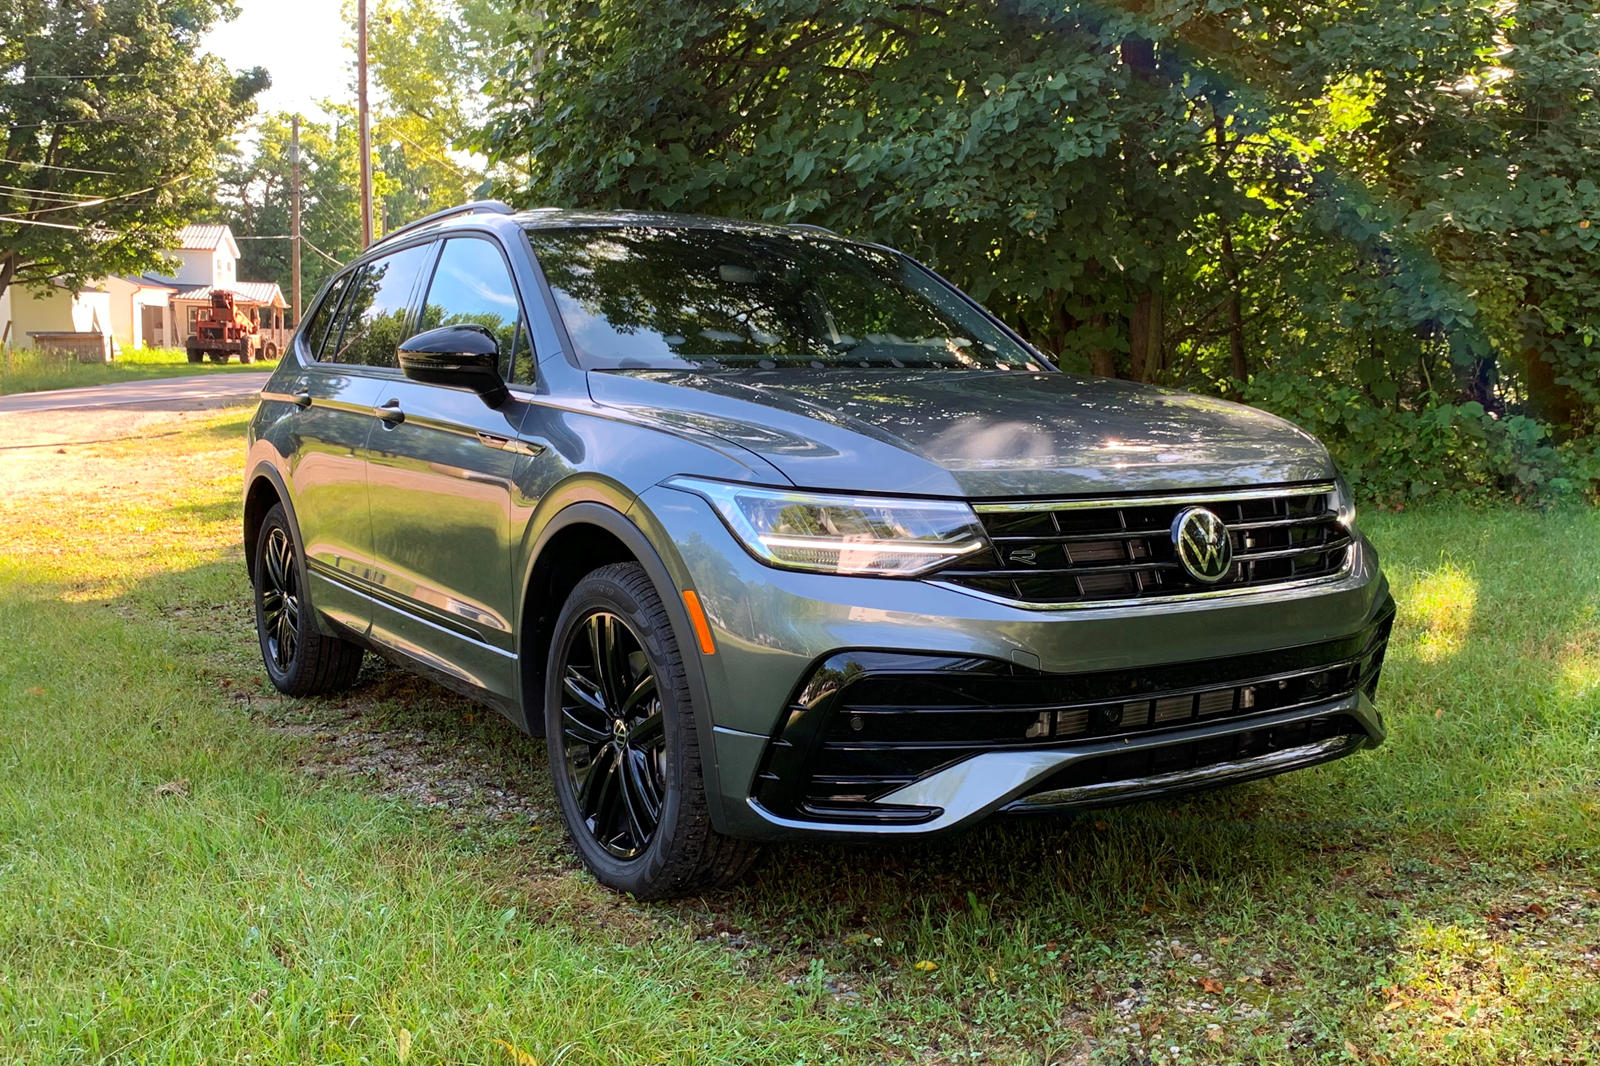 2022 Volkswagen Tiguan First Drive Review: Popular For A Reason